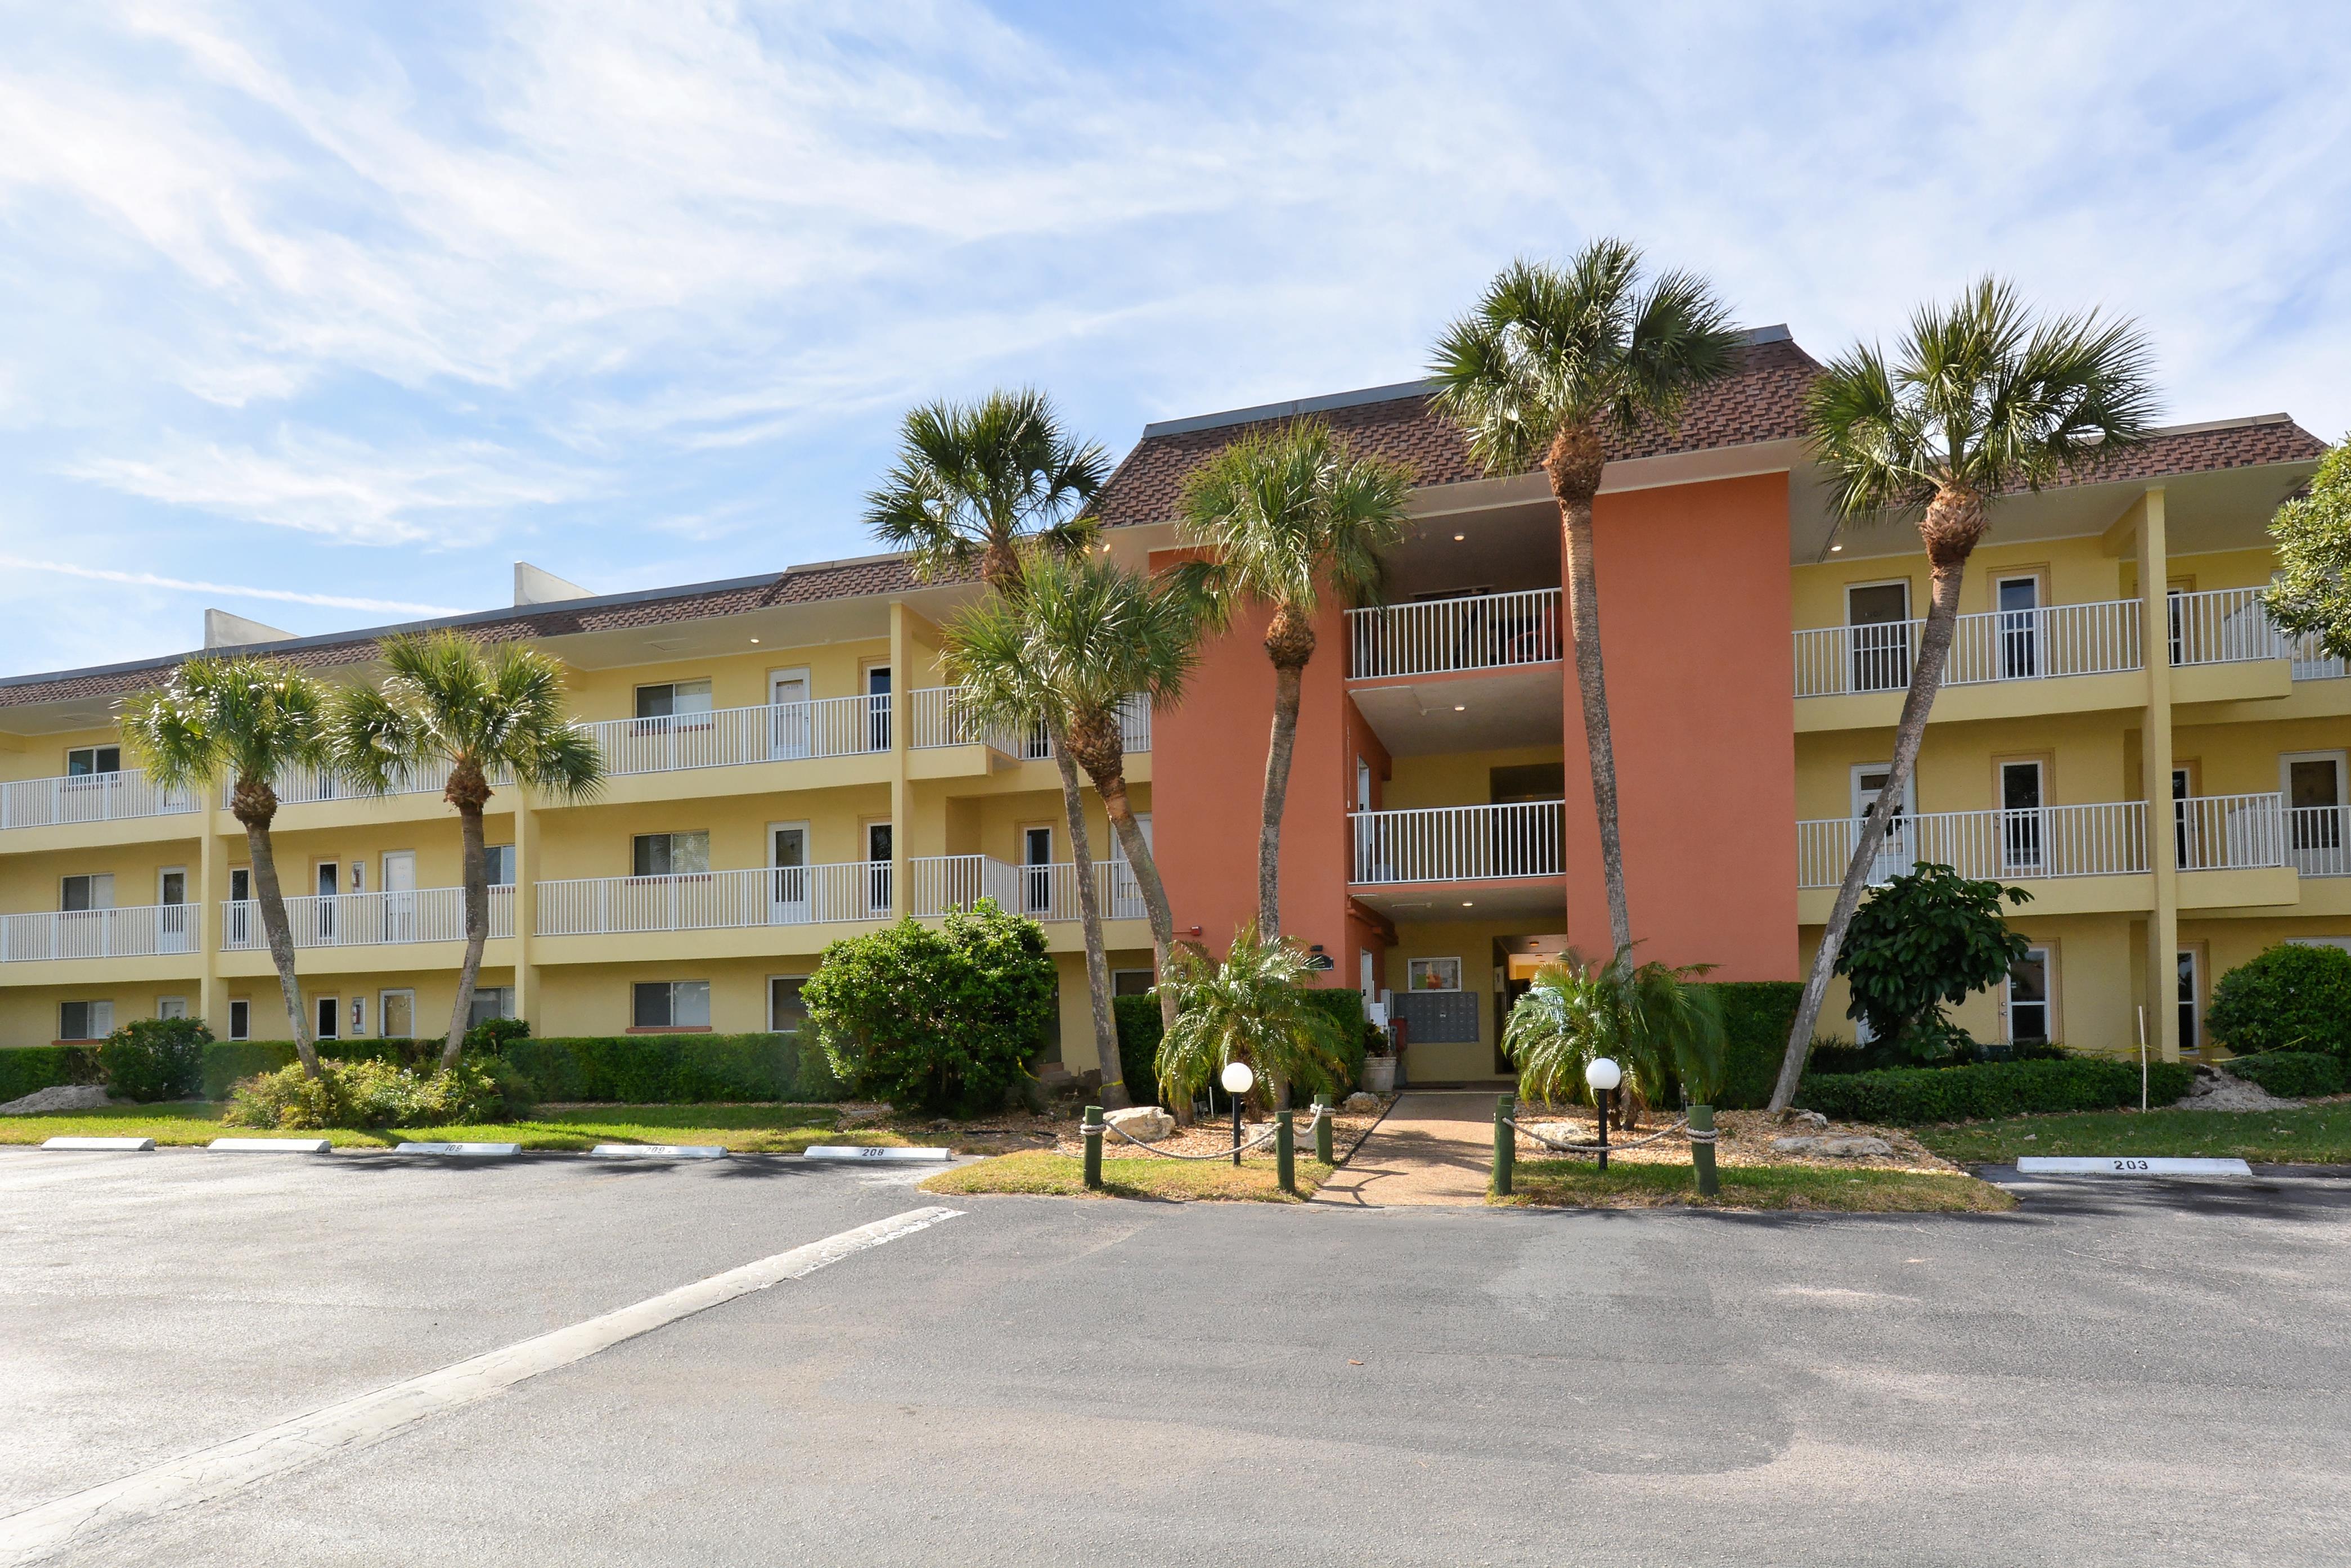 Fisherman's Cove in Siesta Key : Condos for Sale with Gorgeous Views